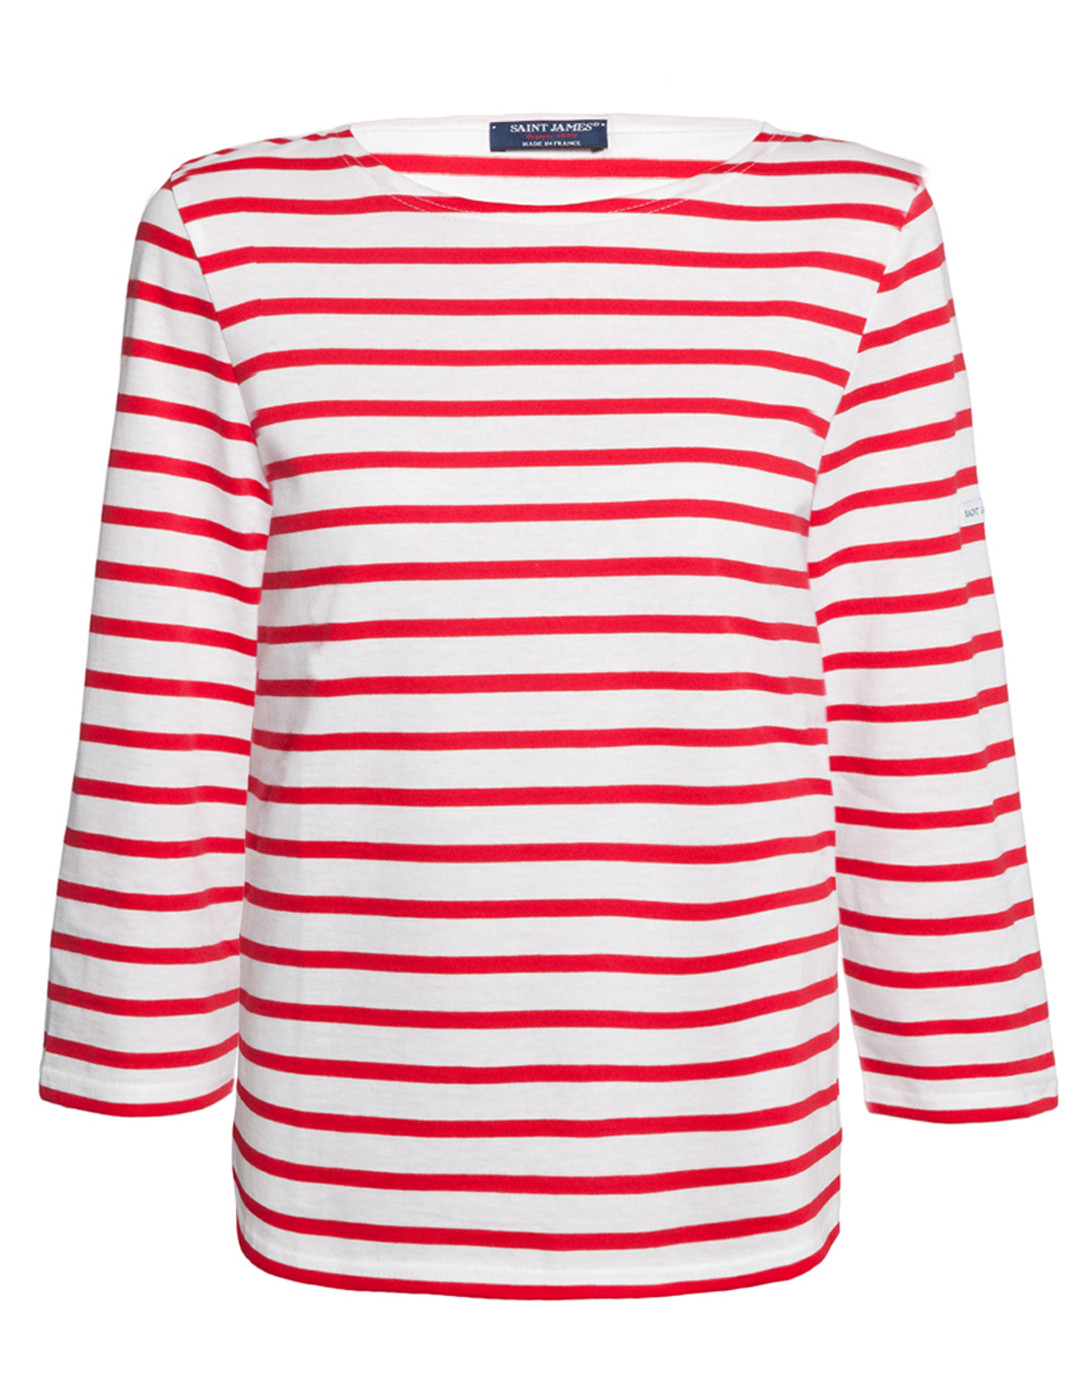 red and white striped tshirt